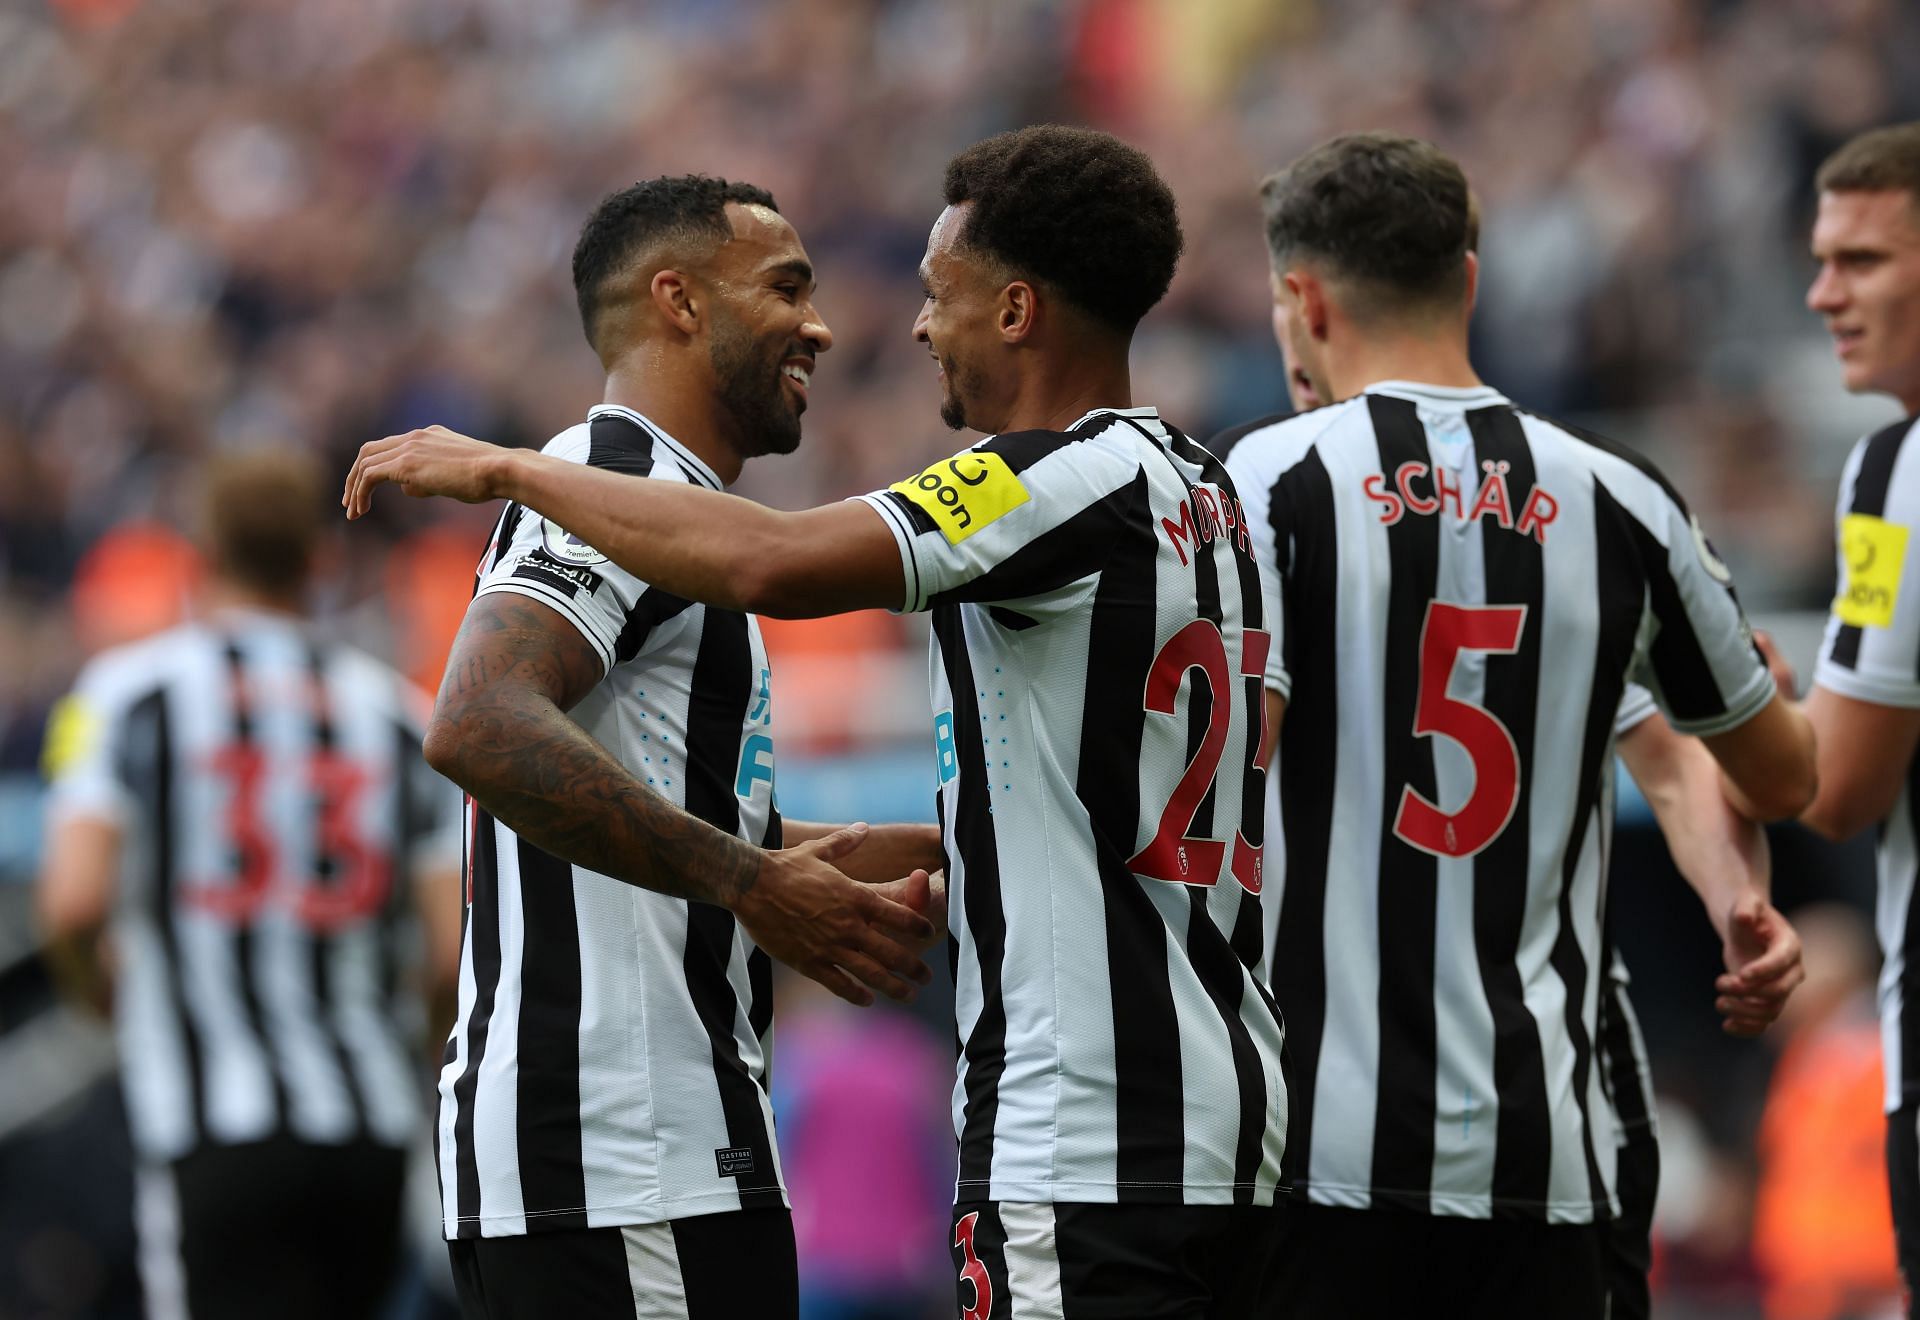 Newcastle United has the best defensive record in the Premier League this season